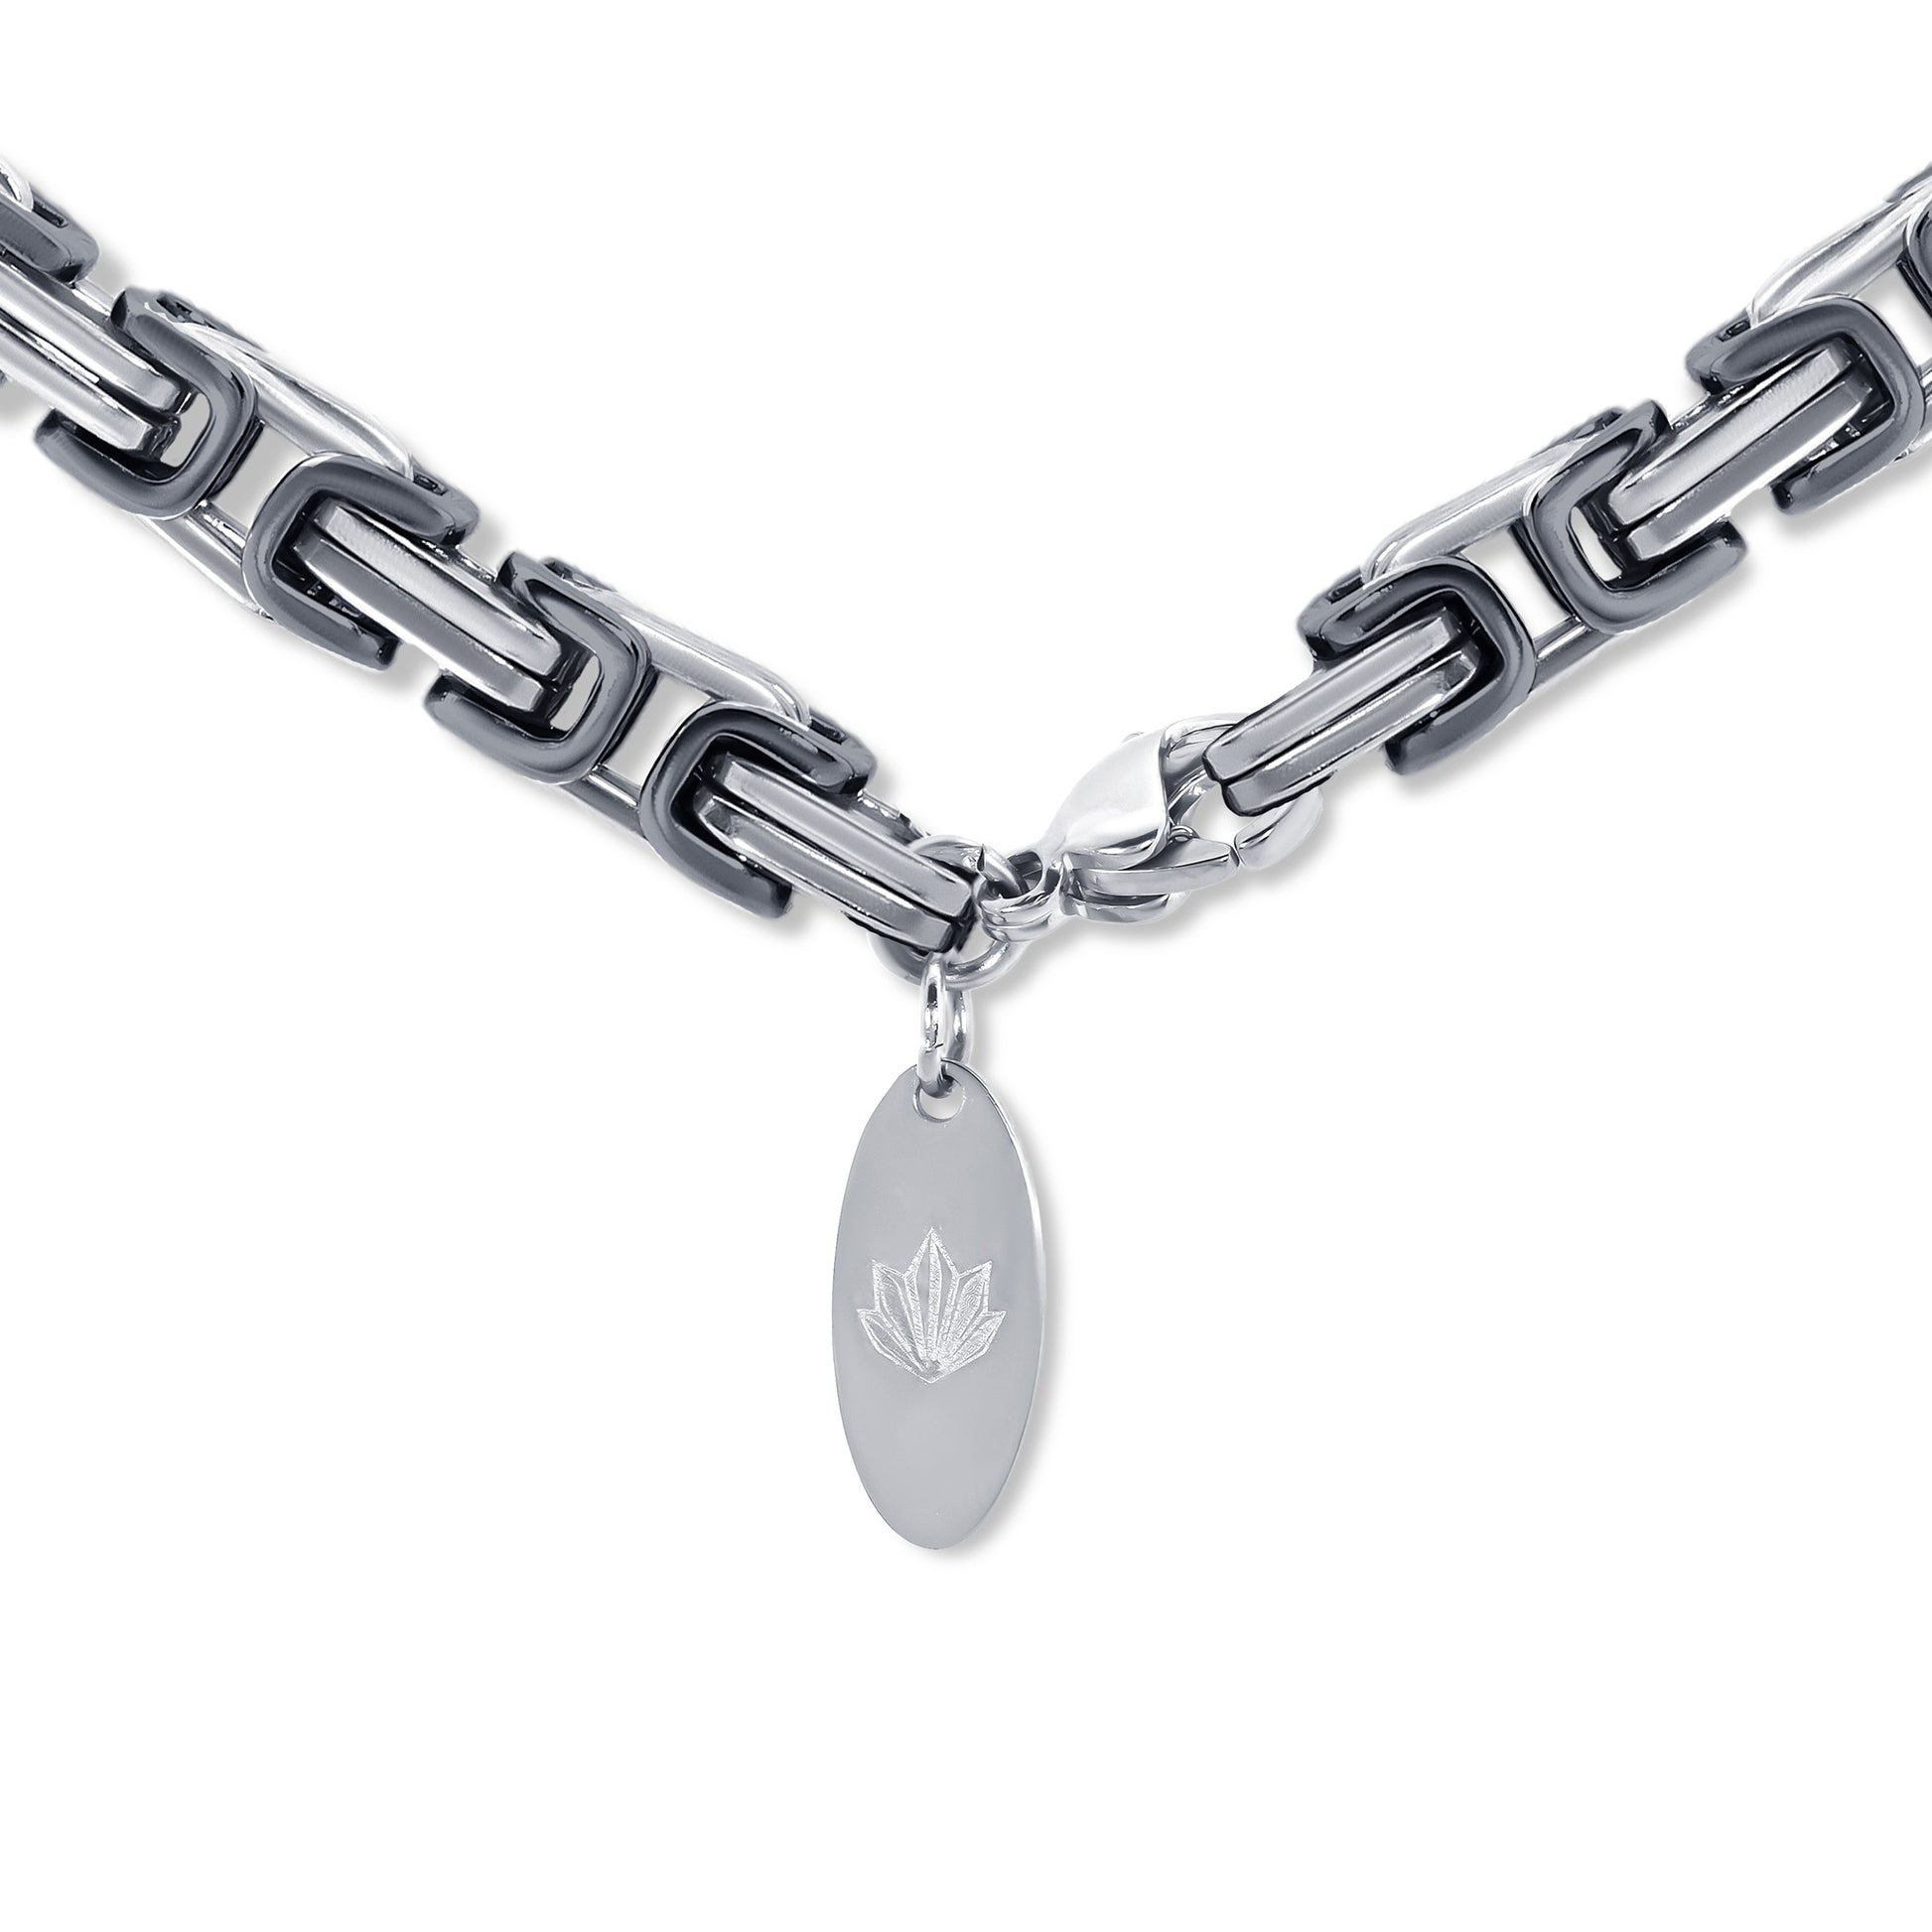 Byzantine Box Link Chain Silver Black 5mm - clasp and brand logo tag on white background